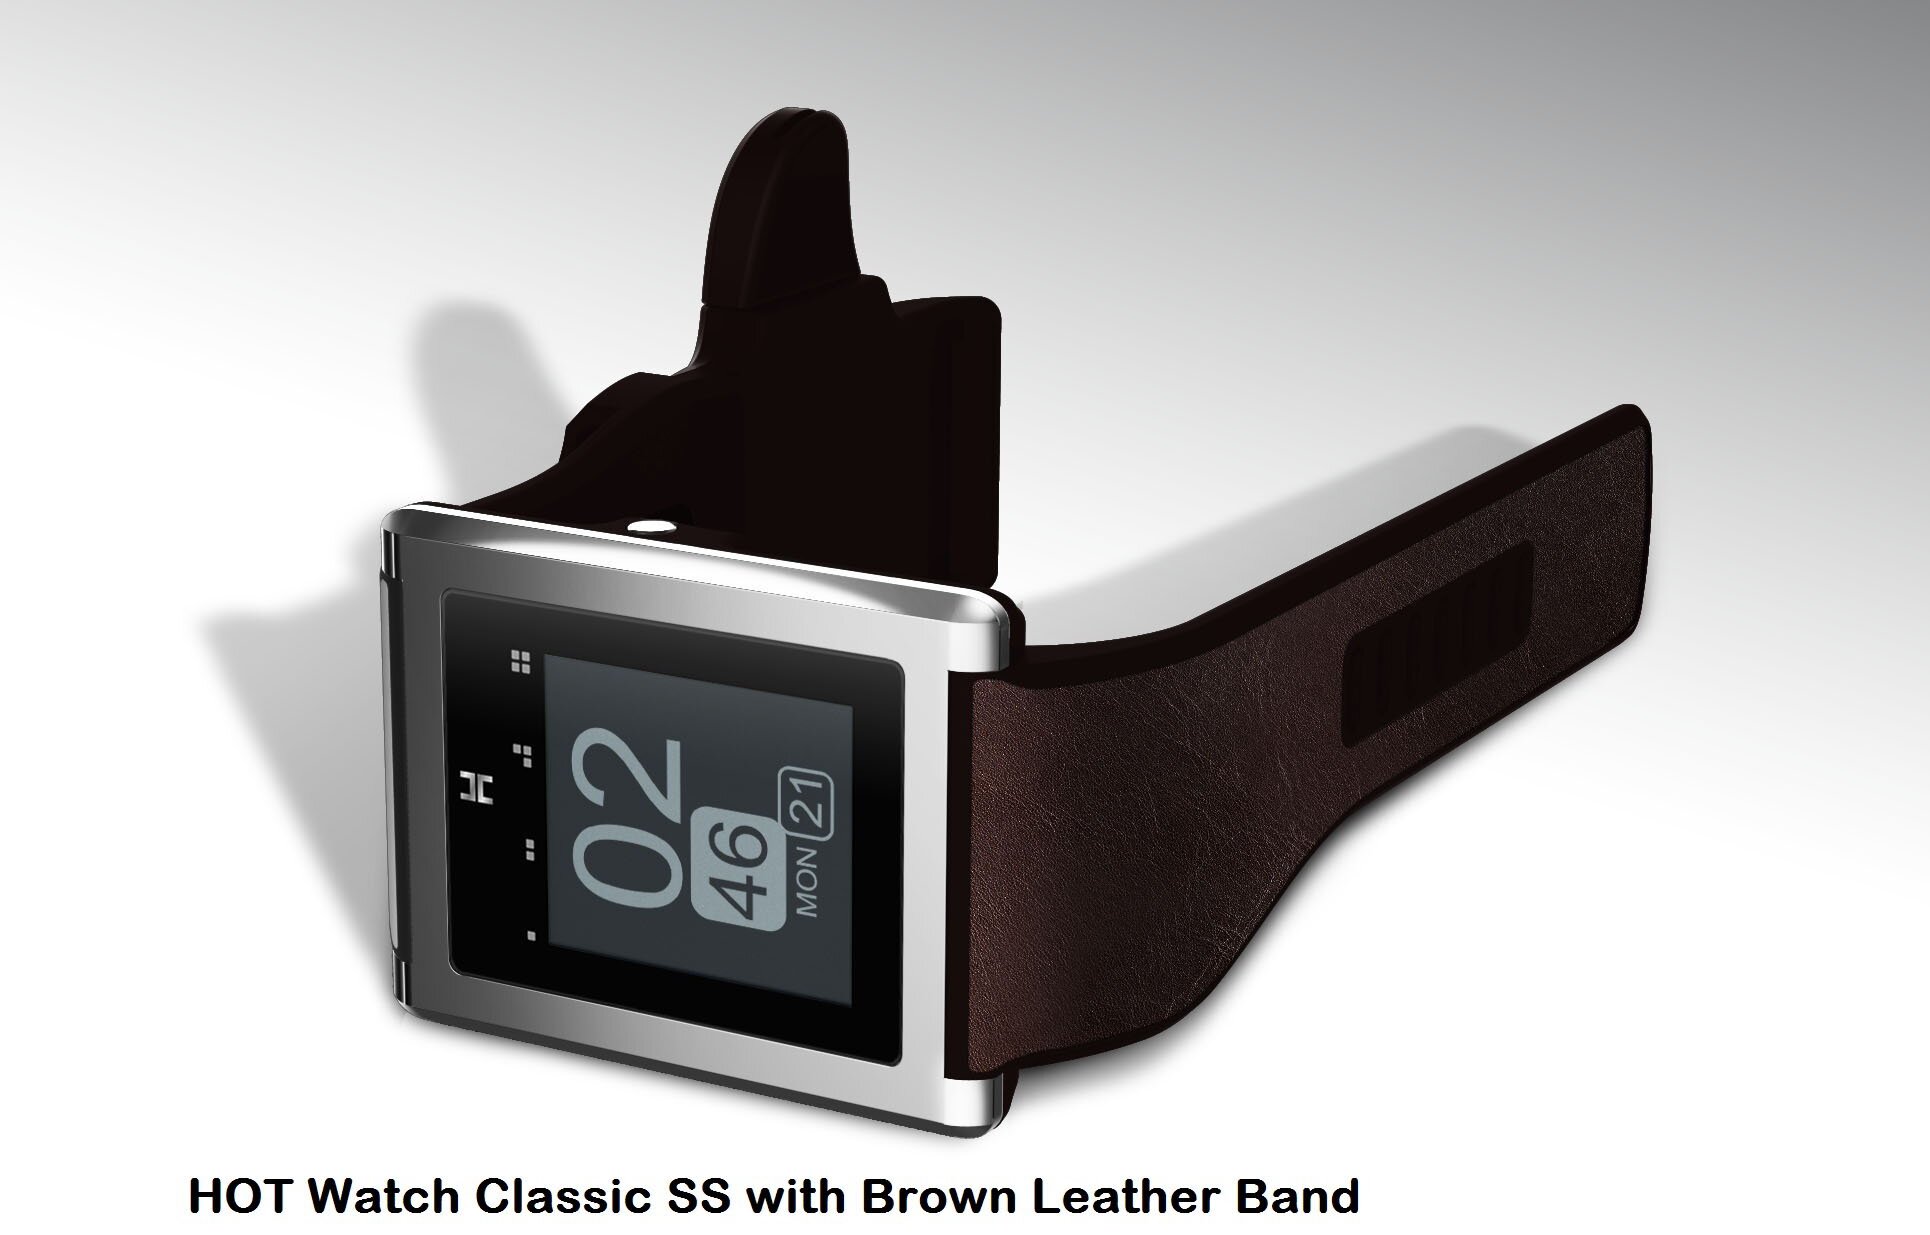 HOT Smart Watch Classic SS with Brown Leather Band